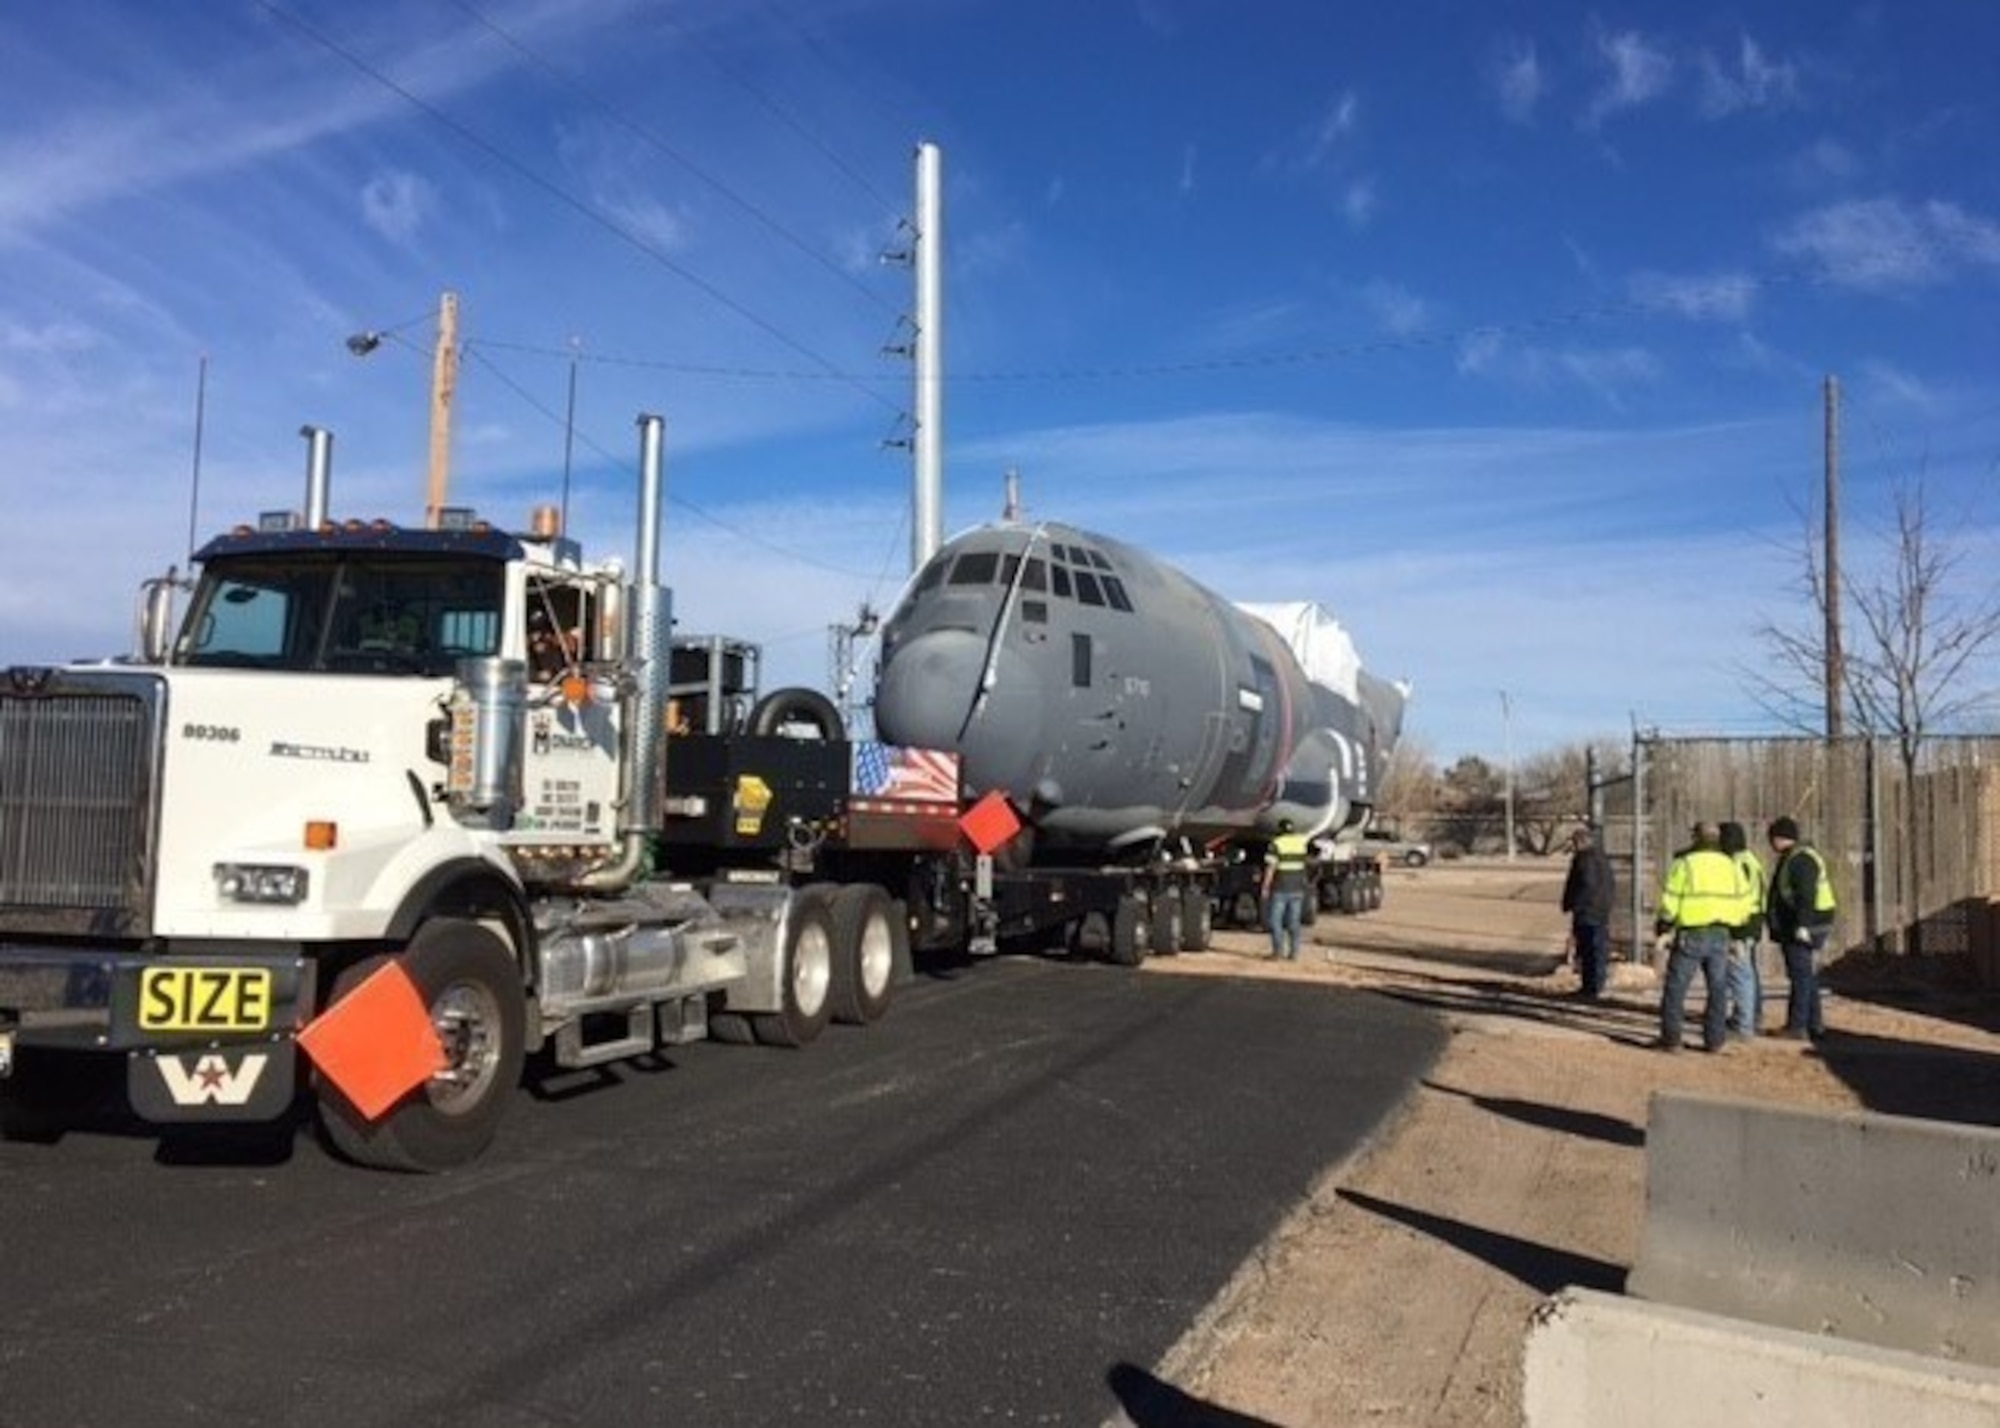 C-130 aircraft fuselage being towed on a flatbed trailer